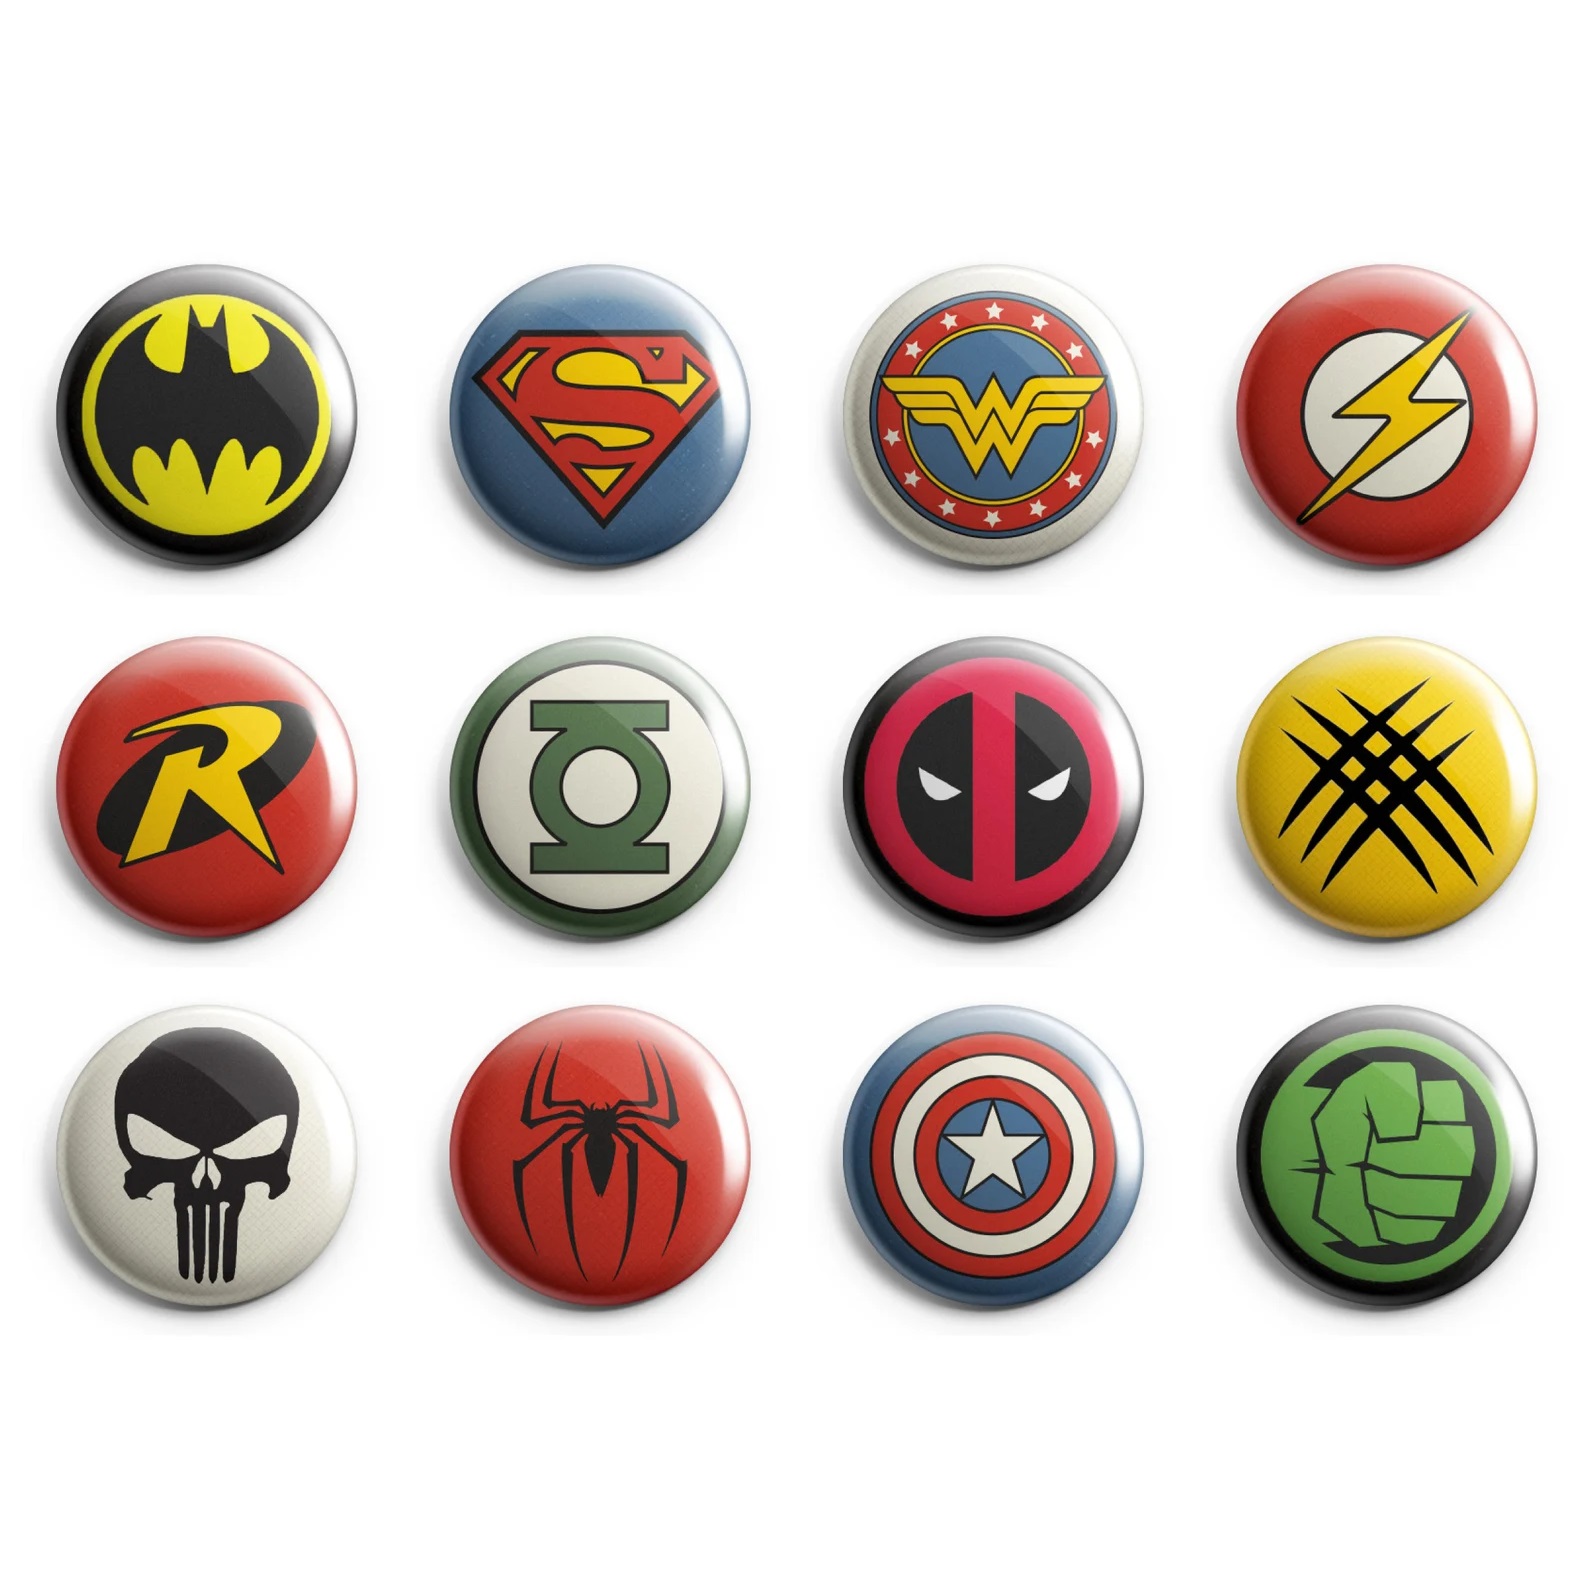 A set of twelve pins with famous superhero logos on them